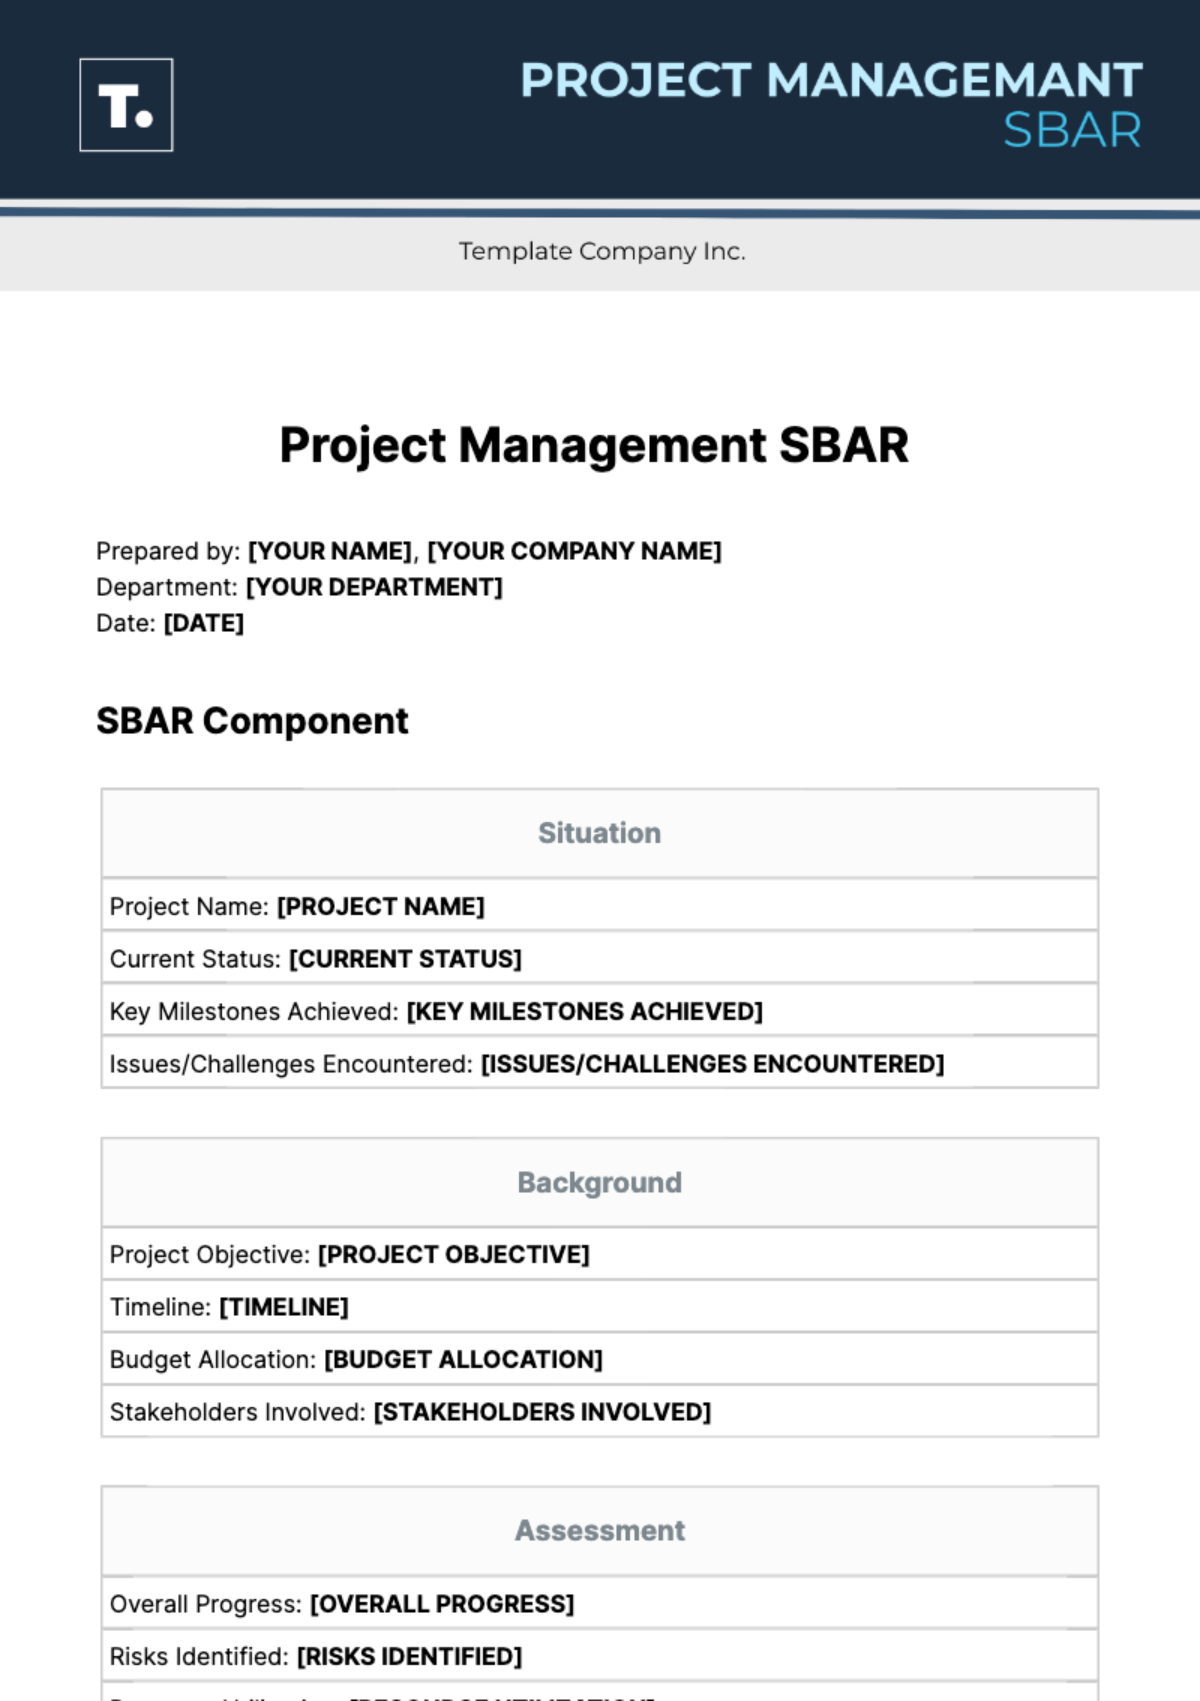 Project Management SBAR Template